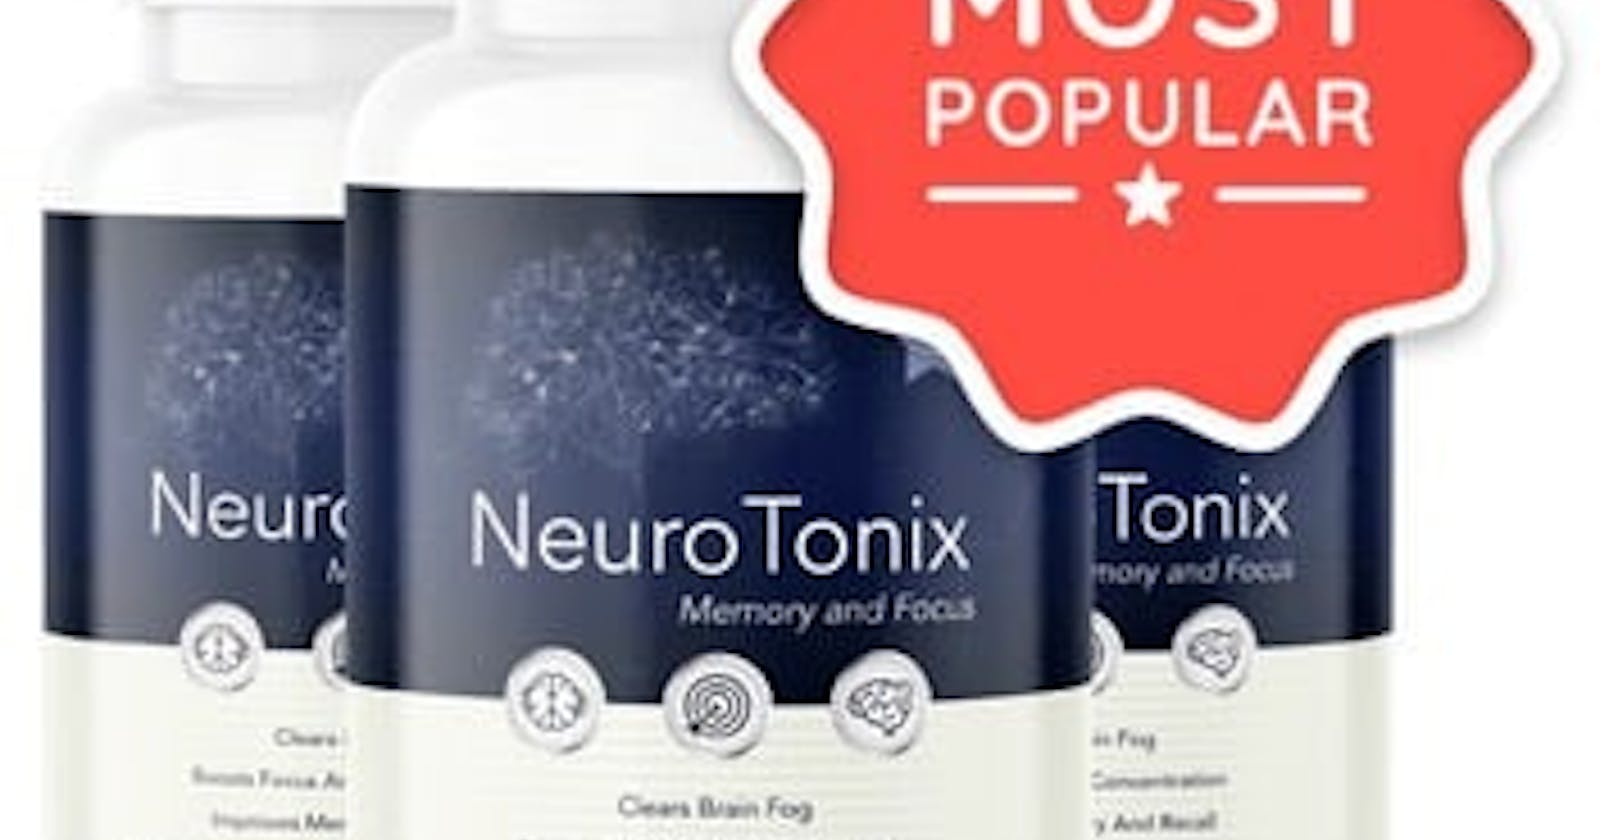 Neuro Tonix Reviews Ingredients, Side Effects, Customer Complaints (Update) Of Official Website!